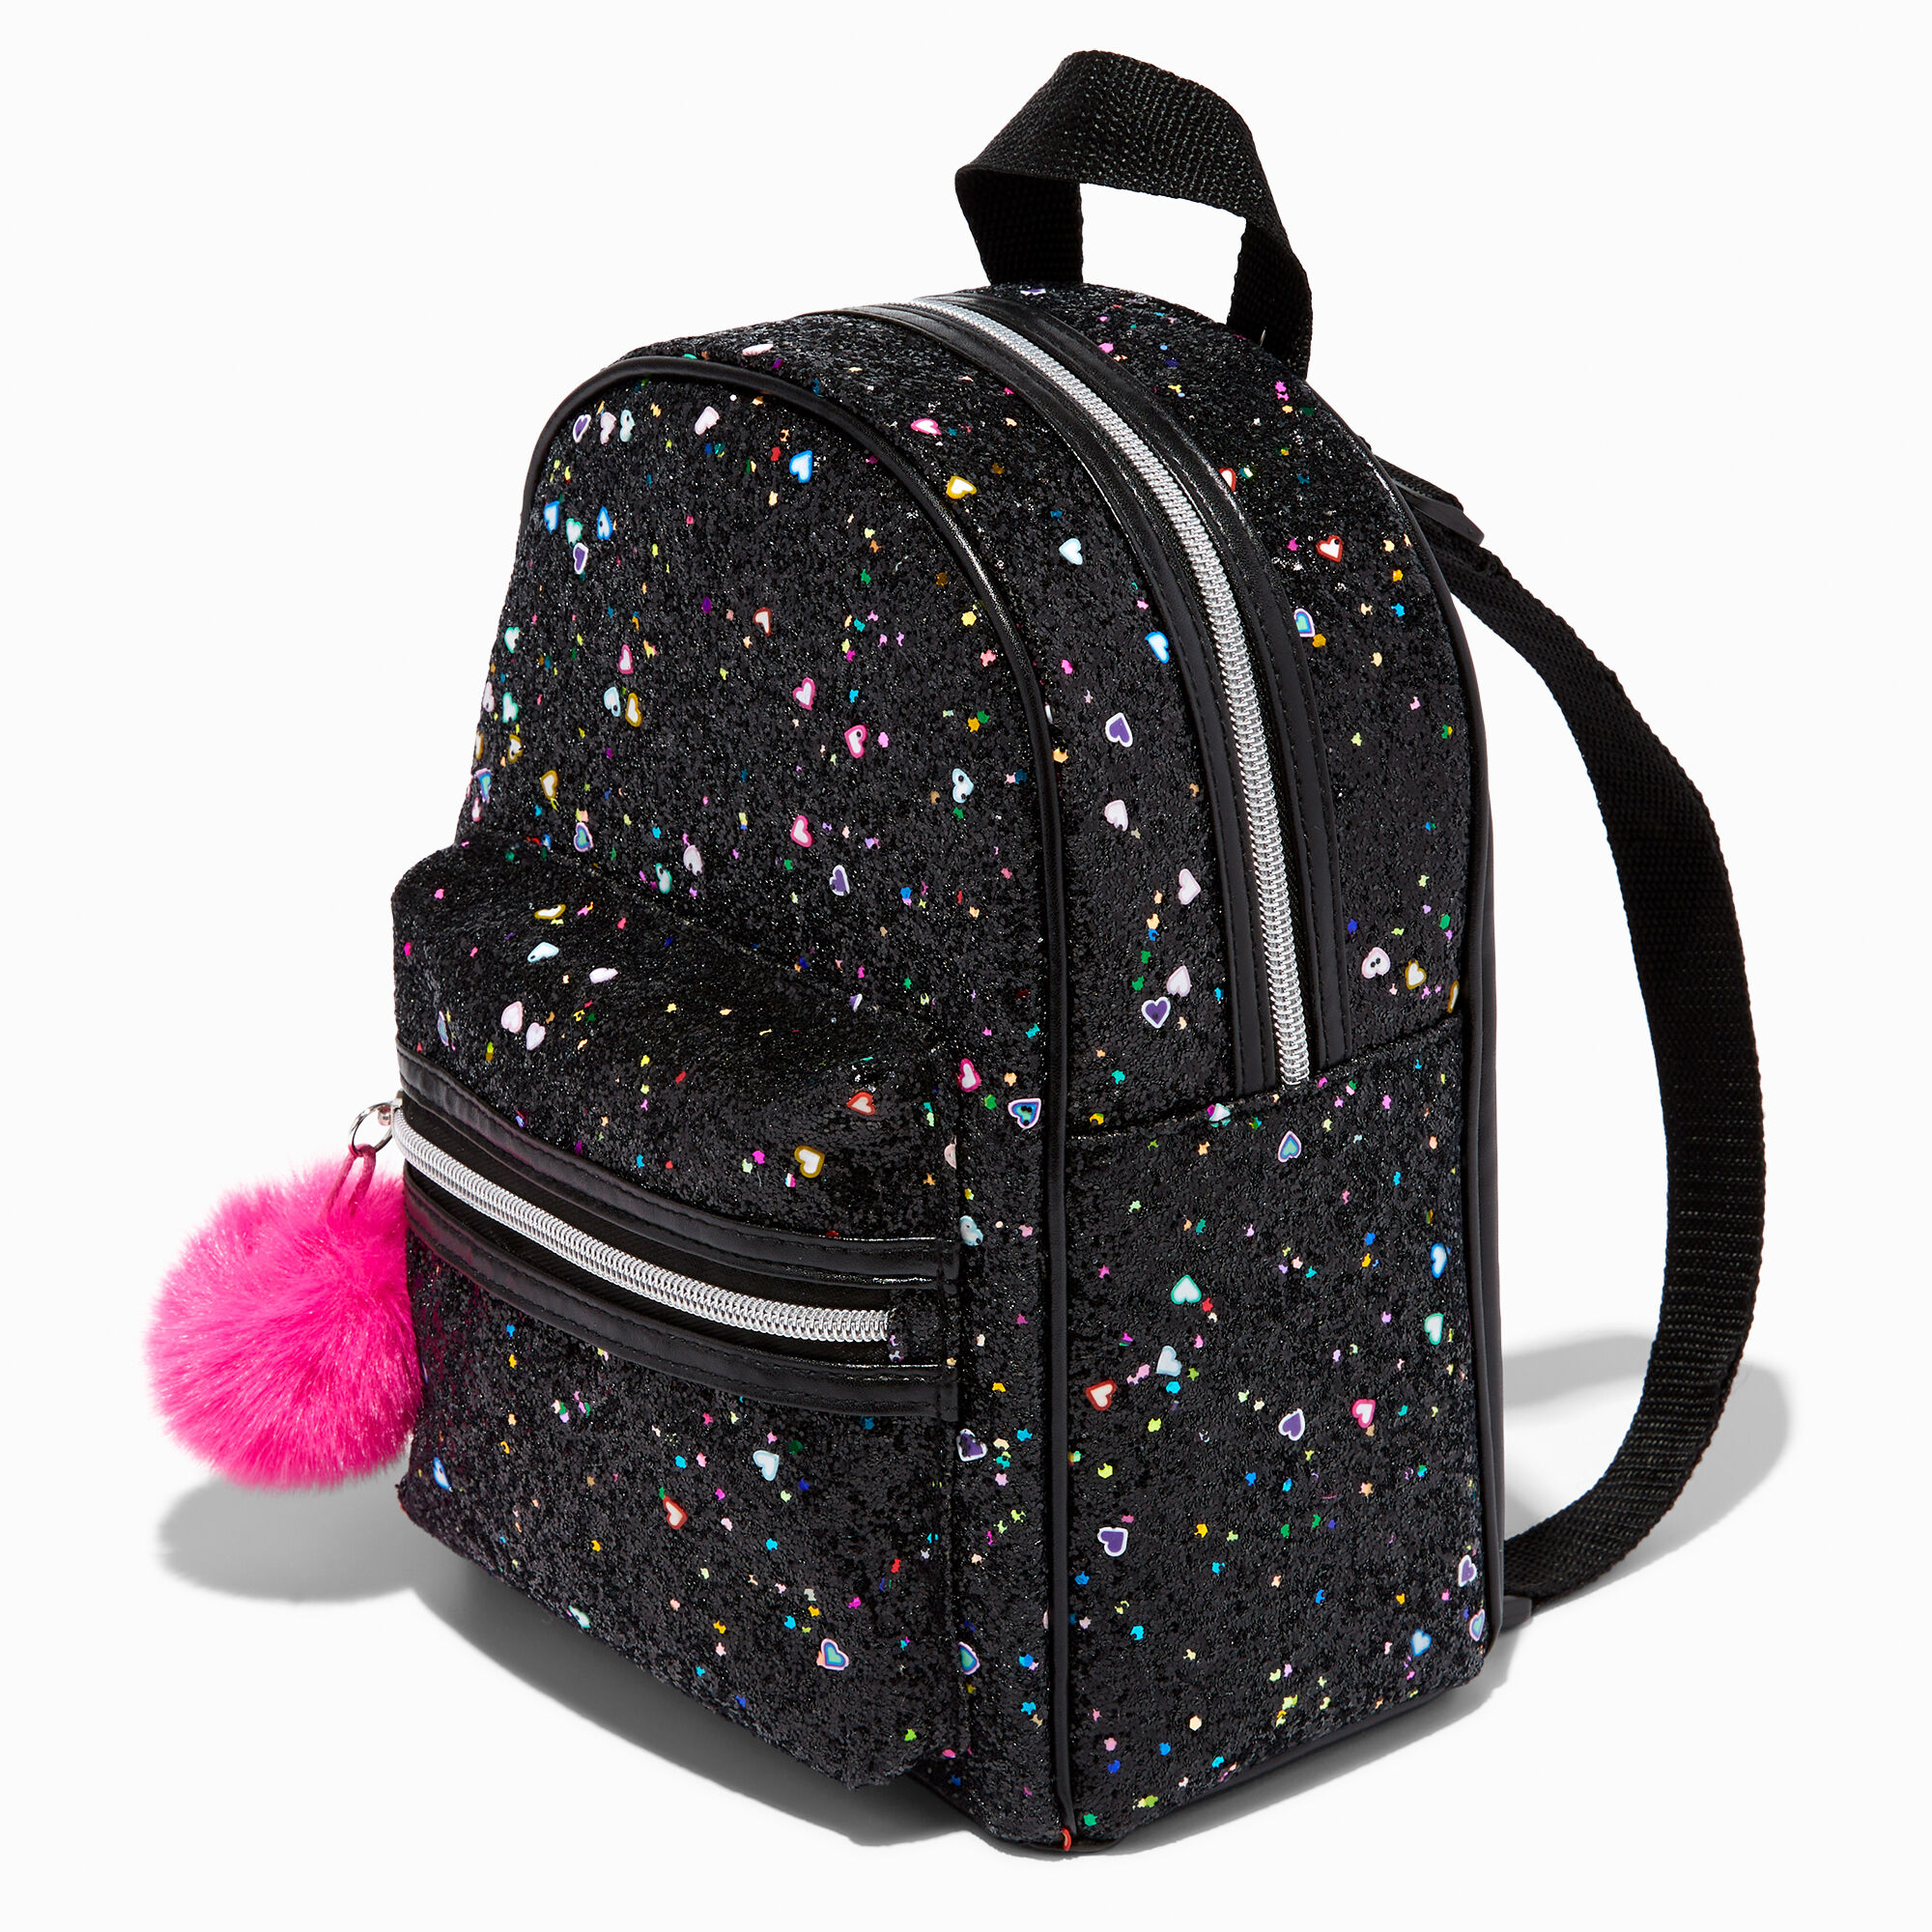 View Claires Heart Glitter Mini Backpack Black information